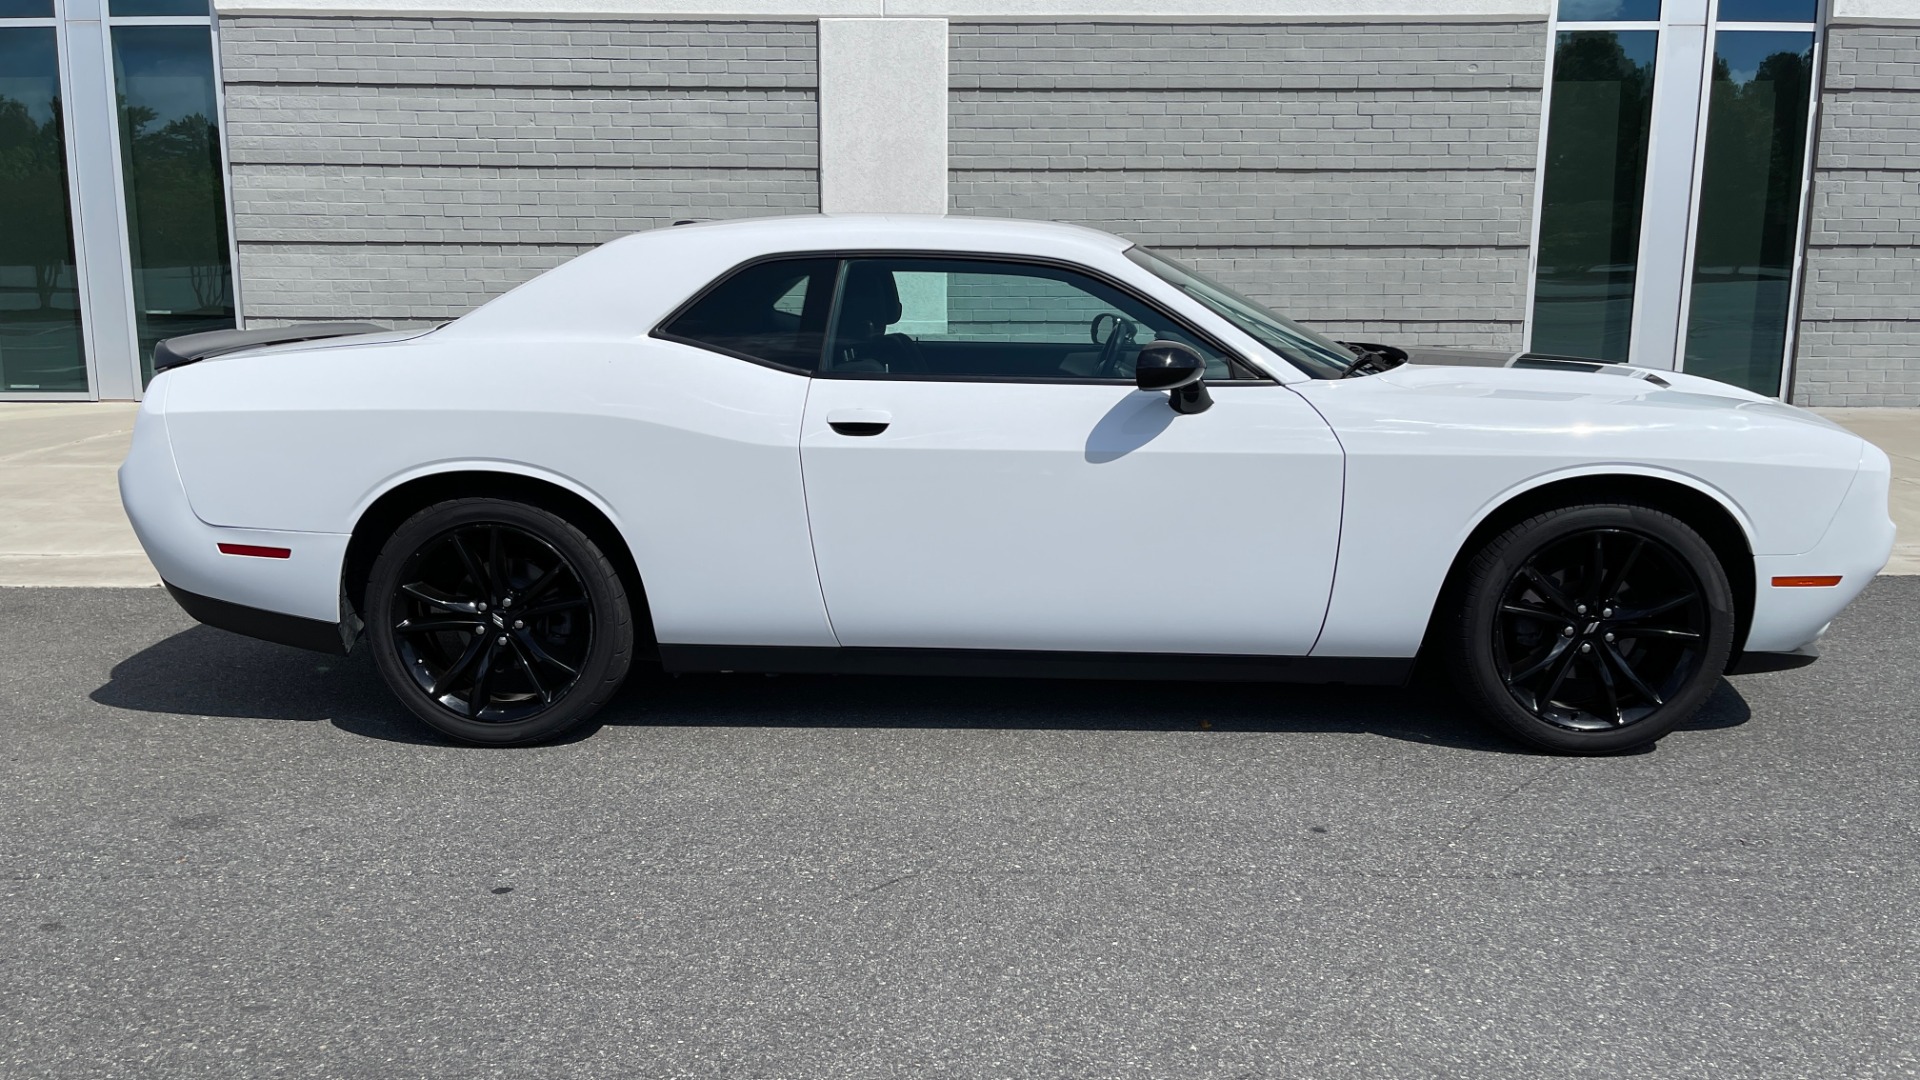 Used 2018 Dodge CHALLENGER SXT COUPE / BLACKTOP PKG / 3.6L V6 / 8-SPD AUTO / REARVIEW for sale Sold at Formula Imports in Charlotte NC 28227 7